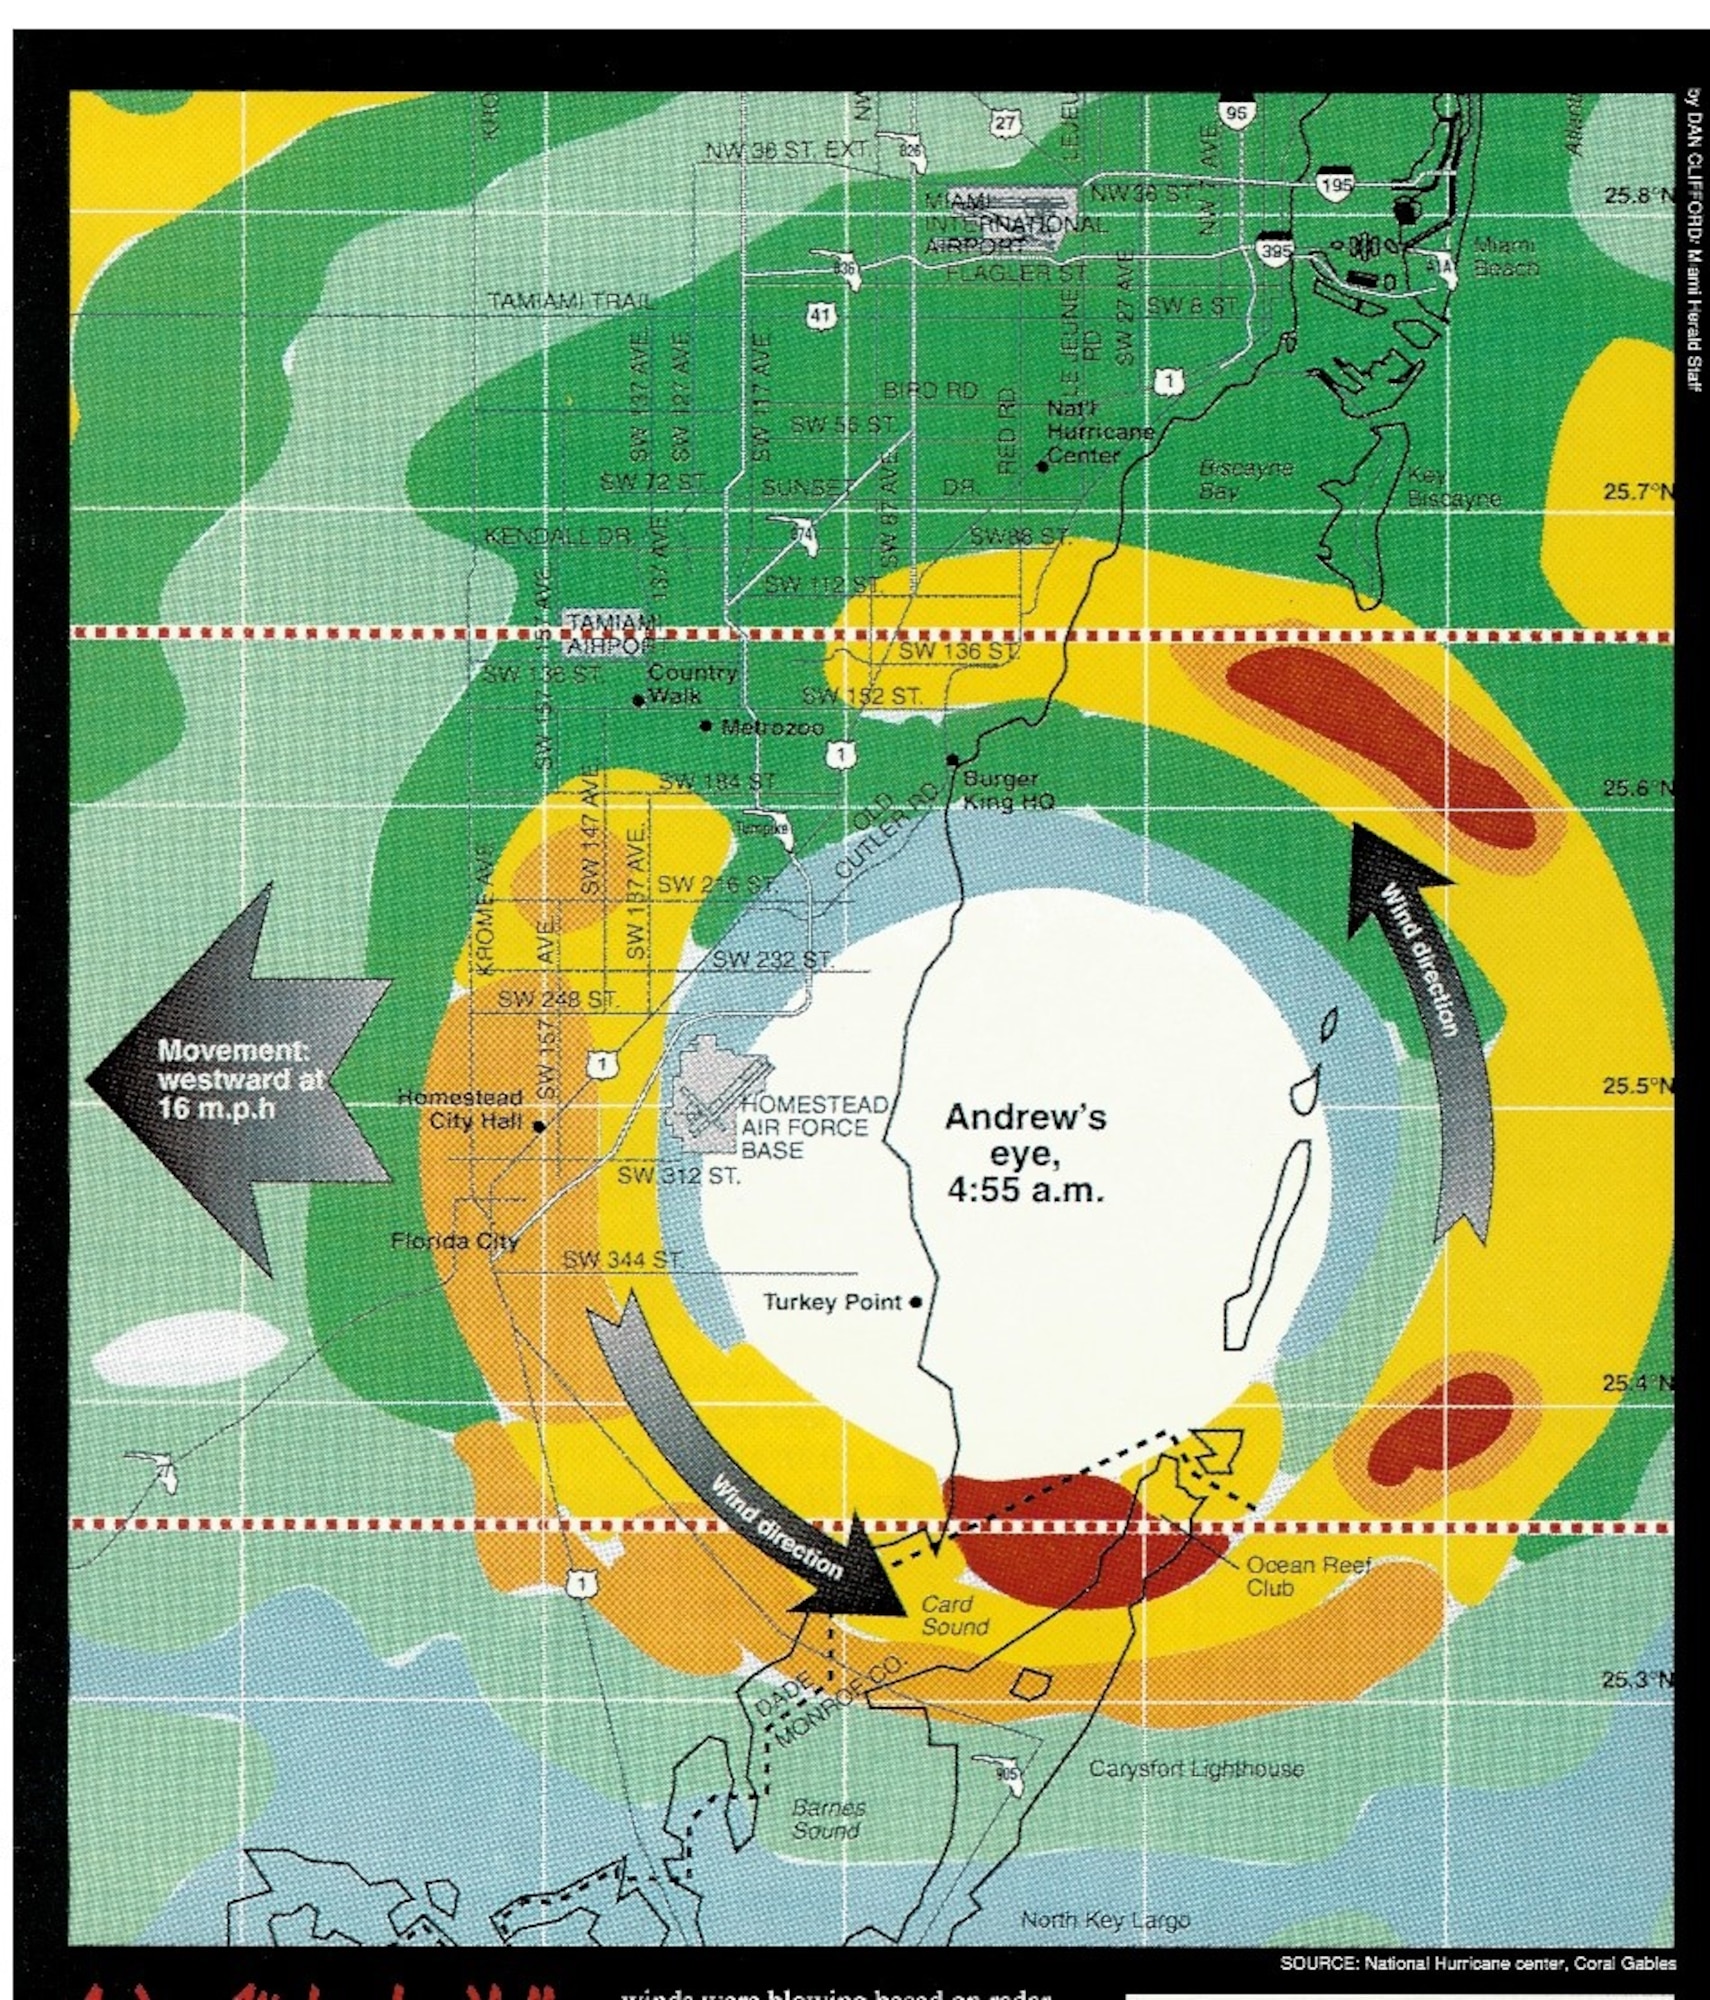 Graphic of Hurricane Andrew’s path from Airman Magazine November 1992 issue.